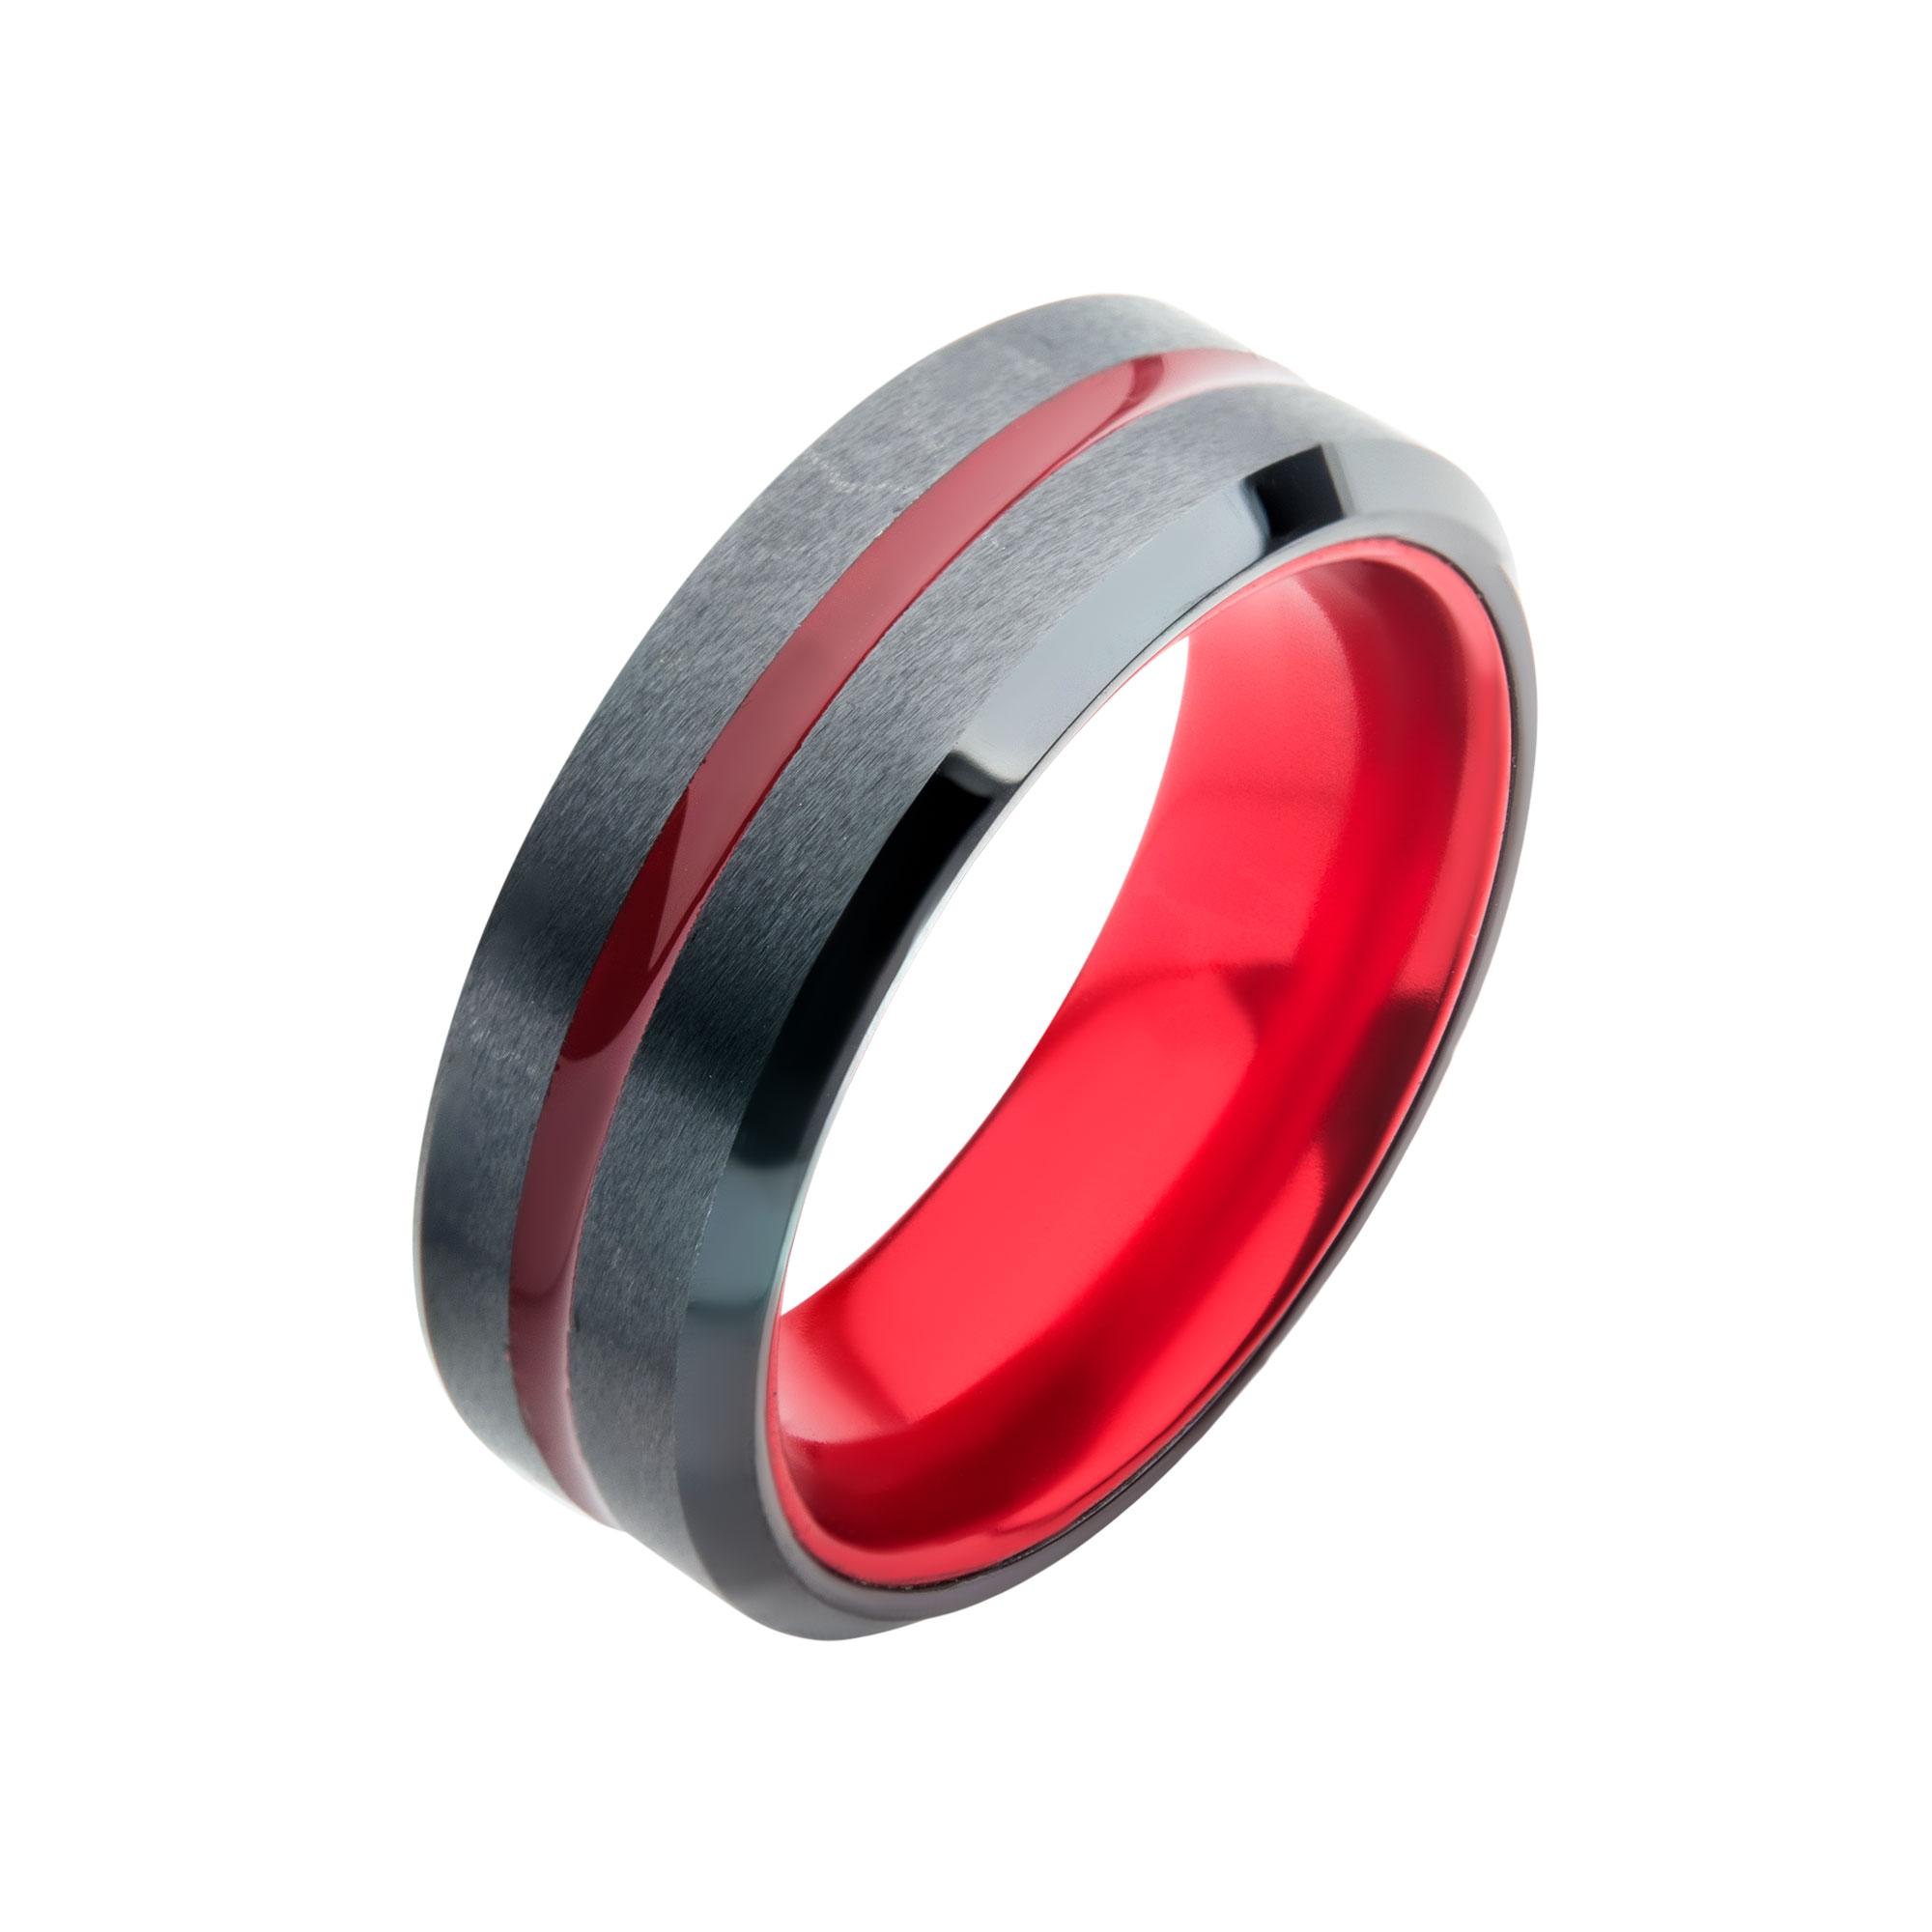 Steel Black Plated with Red Aluminum Beveled Wedding Band Ring Lewis Jewelers, Inc. Ansonia, CT